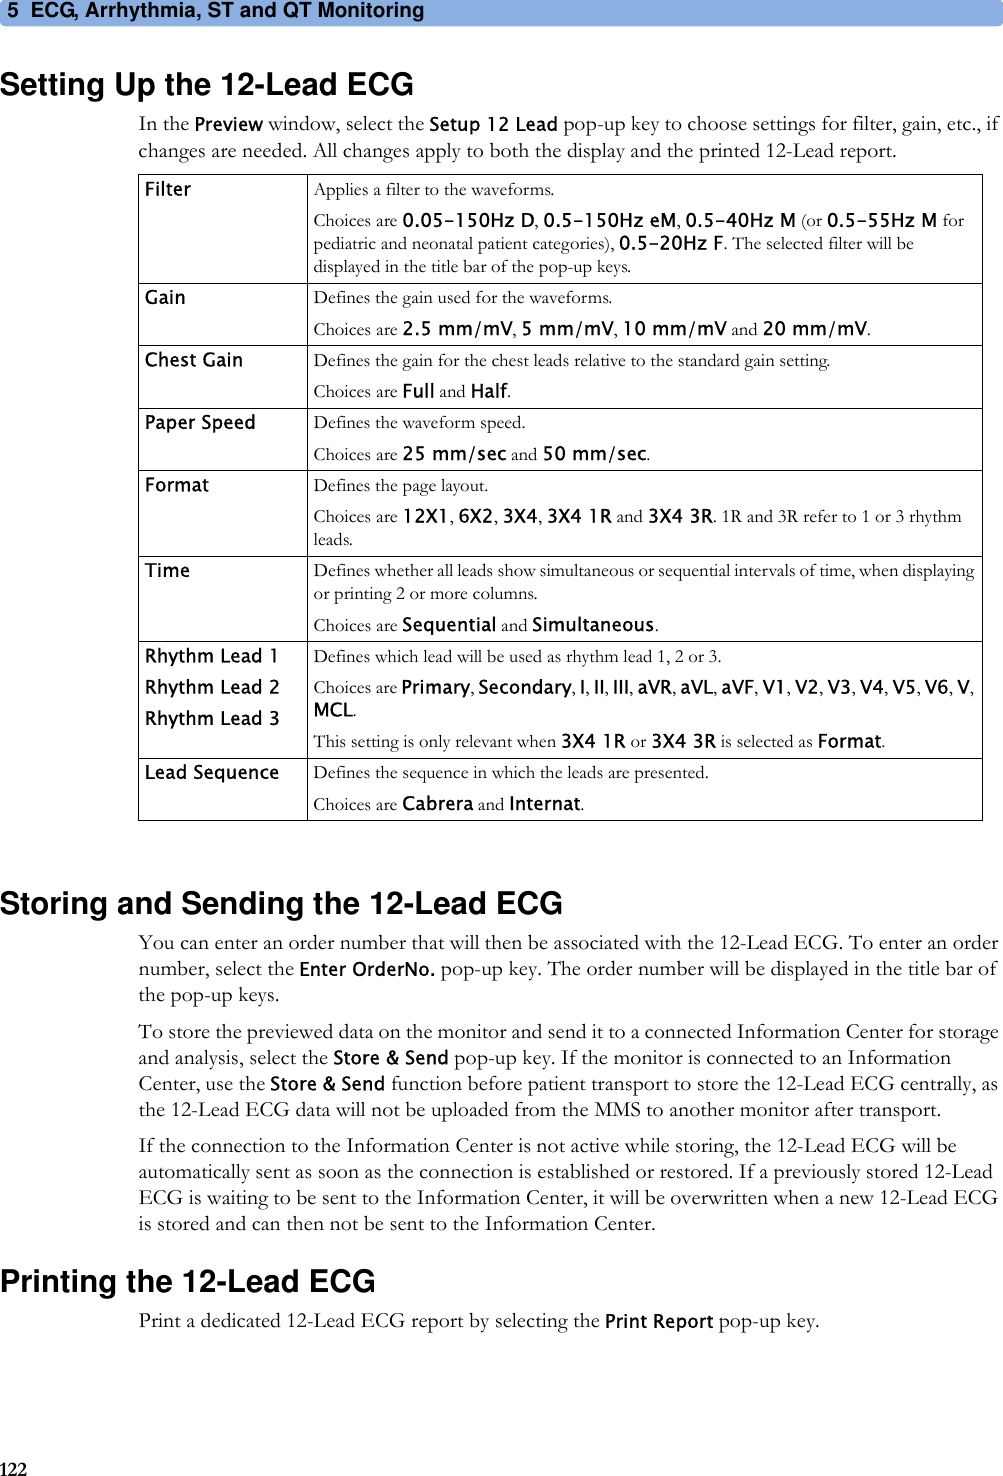 5 ECG, Arrhythmia, ST and QT Monitoring122Setting Up the 12-Lead ECGIn the Preview window, select the Setup 12 Lead pop-up key to choose settings for filter, gain, etc., if changes are needed. All changes apply to both the display and the printed 12-Lead report.Storing and Sending the 12-Lead ECGYou can enter an order number that will then be associated with the 12-Lead ECG. To enter an order number, select the Enter OrderNo. pop-up key. The order number will be displayed in the title bar of the pop-up keys.To store the previewed data on the monitor and send it to a connected Information Center for storage and analysis, select the Store &amp; Send pop-up key. If the monitor is connected to an Information Center, use the Store &amp; Send function before patient transport to store the 12-Lead ECG centrally, as the 12-Lead ECG data will not be uploaded from the MMS to another monitor after transport.If the connection to the Information Center is not active while storing, the 12-Lead ECG will be automatically sent as soon as the connection is established or restored. If a previously stored 12-Lead ECG is waiting to be sent to the Information Center, it will be overwritten when a new 12-Lead ECG is stored and can then not be sent to the Information Center.Printing the 12-Lead ECGPrint a dedicated 12-Lead ECG report by selecting the Print Report pop-up key.Filter Applies a filter to the waveforms.Choices are 0.05-150Hz D, 0.5-150Hz eM, 0.5-40Hz M (or 0.5-55Hz M for pediatric and neonatal patient categories), 0.5-20Hz F. The selected filter will be displayed in the title bar of the pop-up keys.Gain Defines the gain used for the waveforms.Choices are 2.5 mm/mV, 5 mm/mV, 10 mm/mV and 20 mm/mV.Chest Gain Defines the gain for the chest leads relative to the standard gain setting.Choices are Full and Half.Paper Speed Defines the waveform speed.Choices are 25 mm/sec and 50 mm/sec.Format Defines the page layout.Choices are 12X1, 6X2, 3X4, 3X4 1R and 3X4 3R. 1R and 3R refer to 1 or 3 rhythm leads.Time Defines whether all leads show simultaneous or sequential intervals of time, when displaying or printing 2 or more columns.Choices are Sequential and Simultaneous.Rhythm Lead 1Rhythm Lead 2Rhythm Lead 3Defines which lead will be used as rhythm lead 1, 2 or 3.Choices are Primary, Secondary, I, II, III, aVR, aVL, aVF, V1, V2, V3, V4, V5, V6, V, MCL.This setting is only relevant when 3X4 1R or 3X4 3R is selected as Format.Lead Sequence Defines the sequence in which the leads are presented.Choices are Cabrera and Internat.